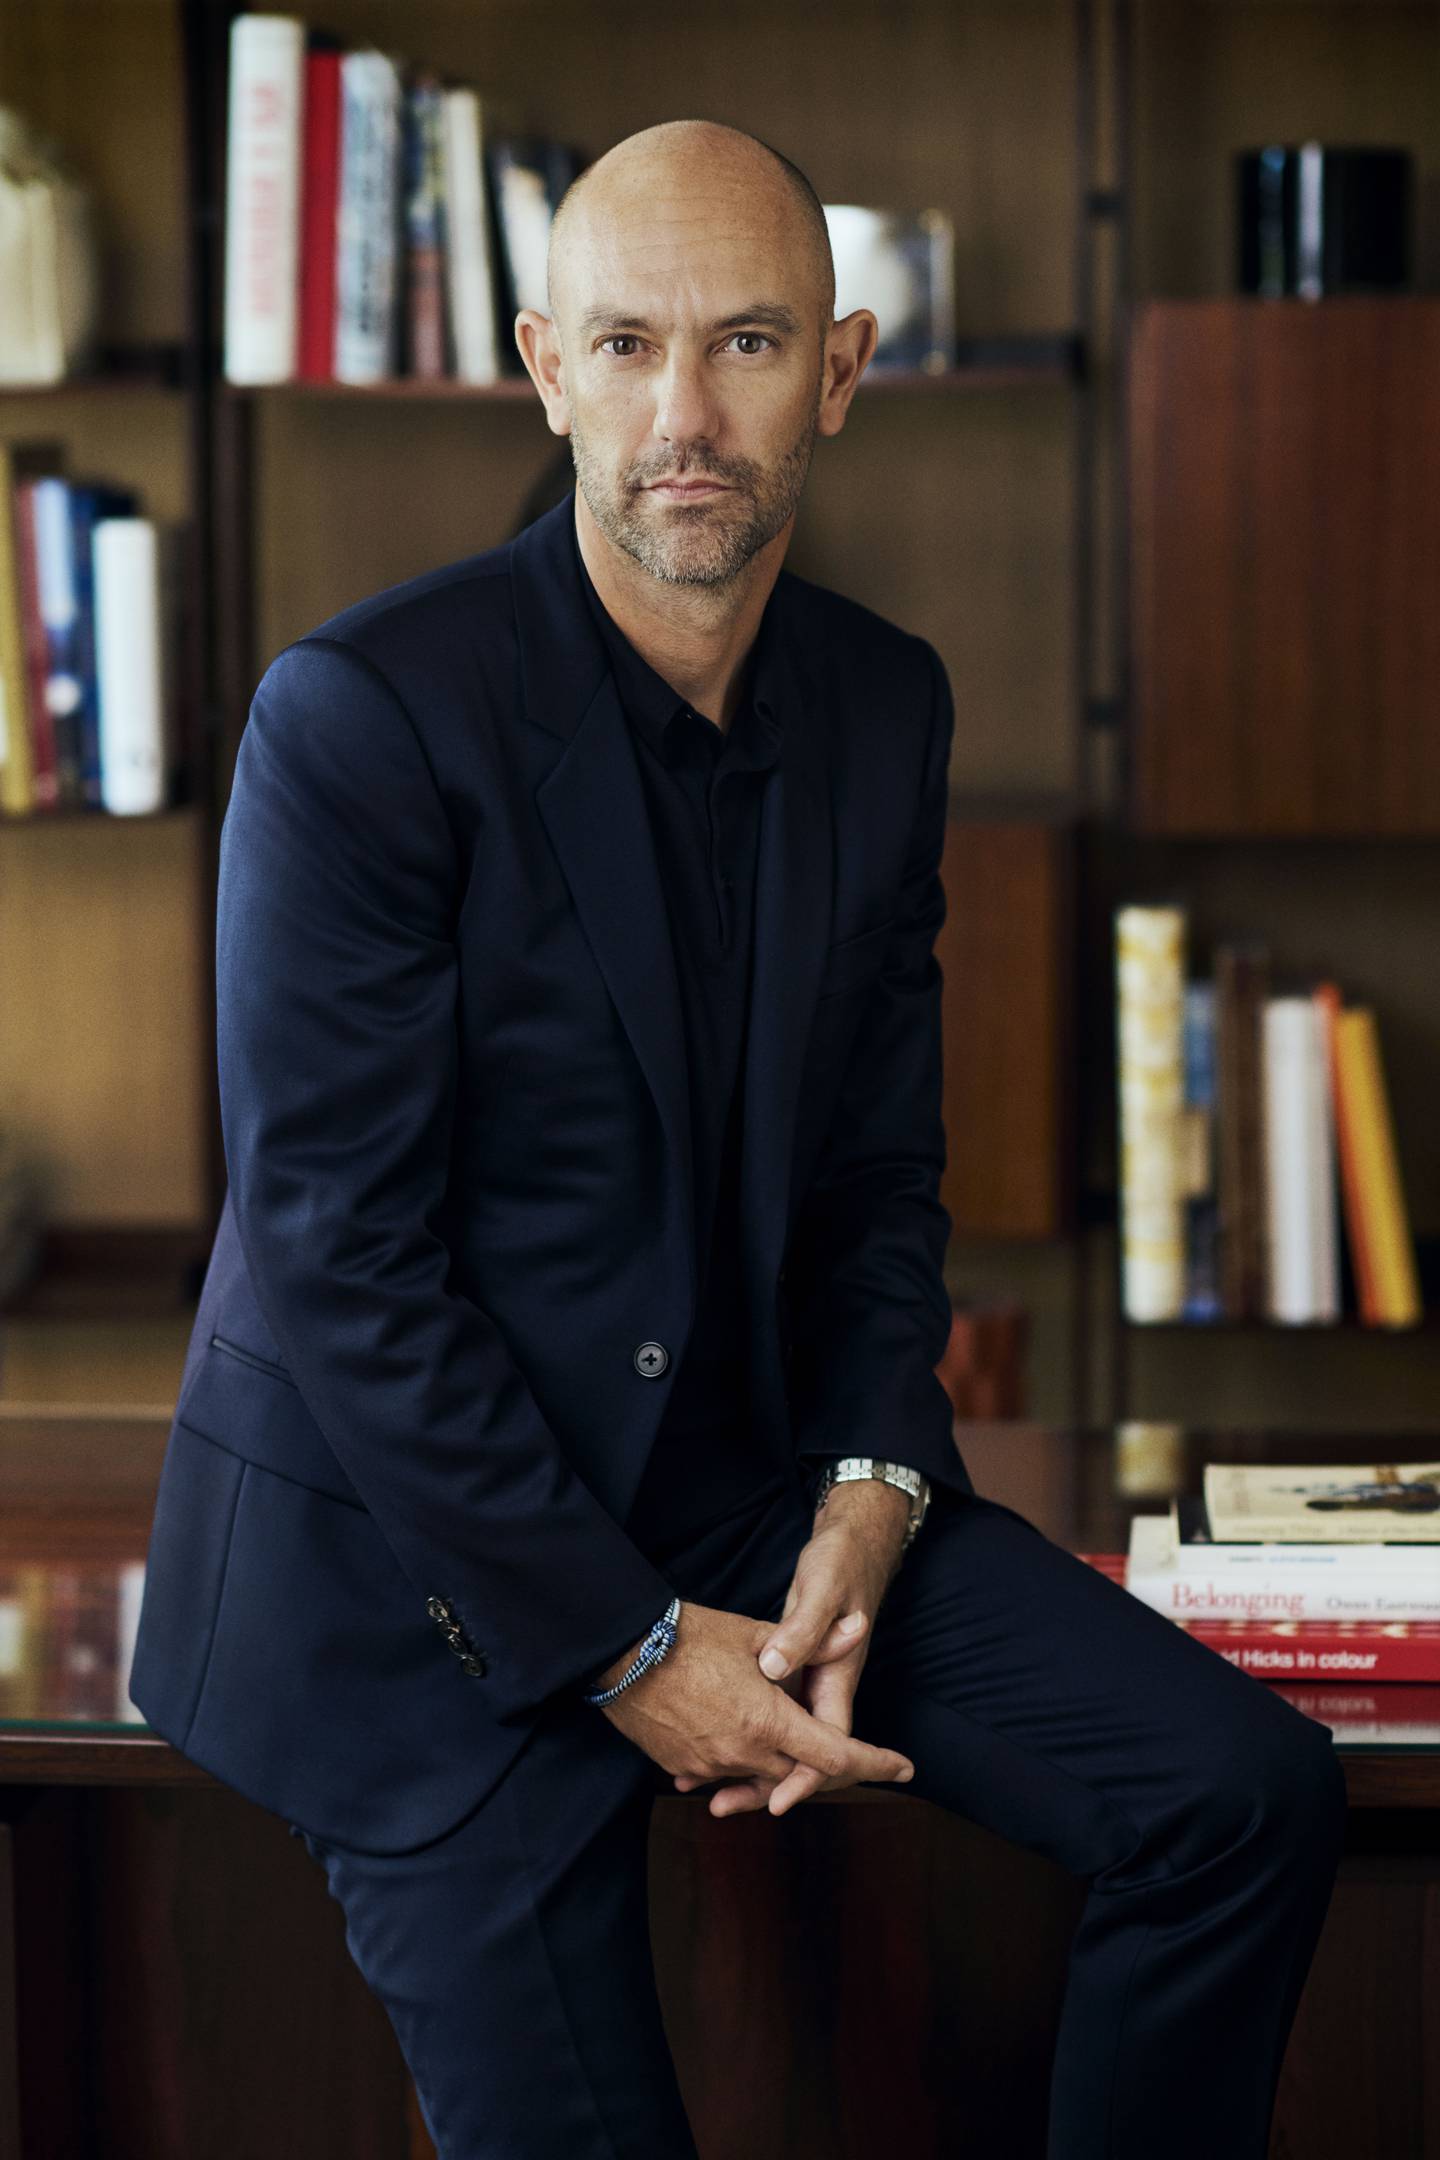 Loro Piana chief executive Damien Bertrand breaks down the strategy shifts he’s put in place to unlock the uber-luxe LVMH label’s growth potential.